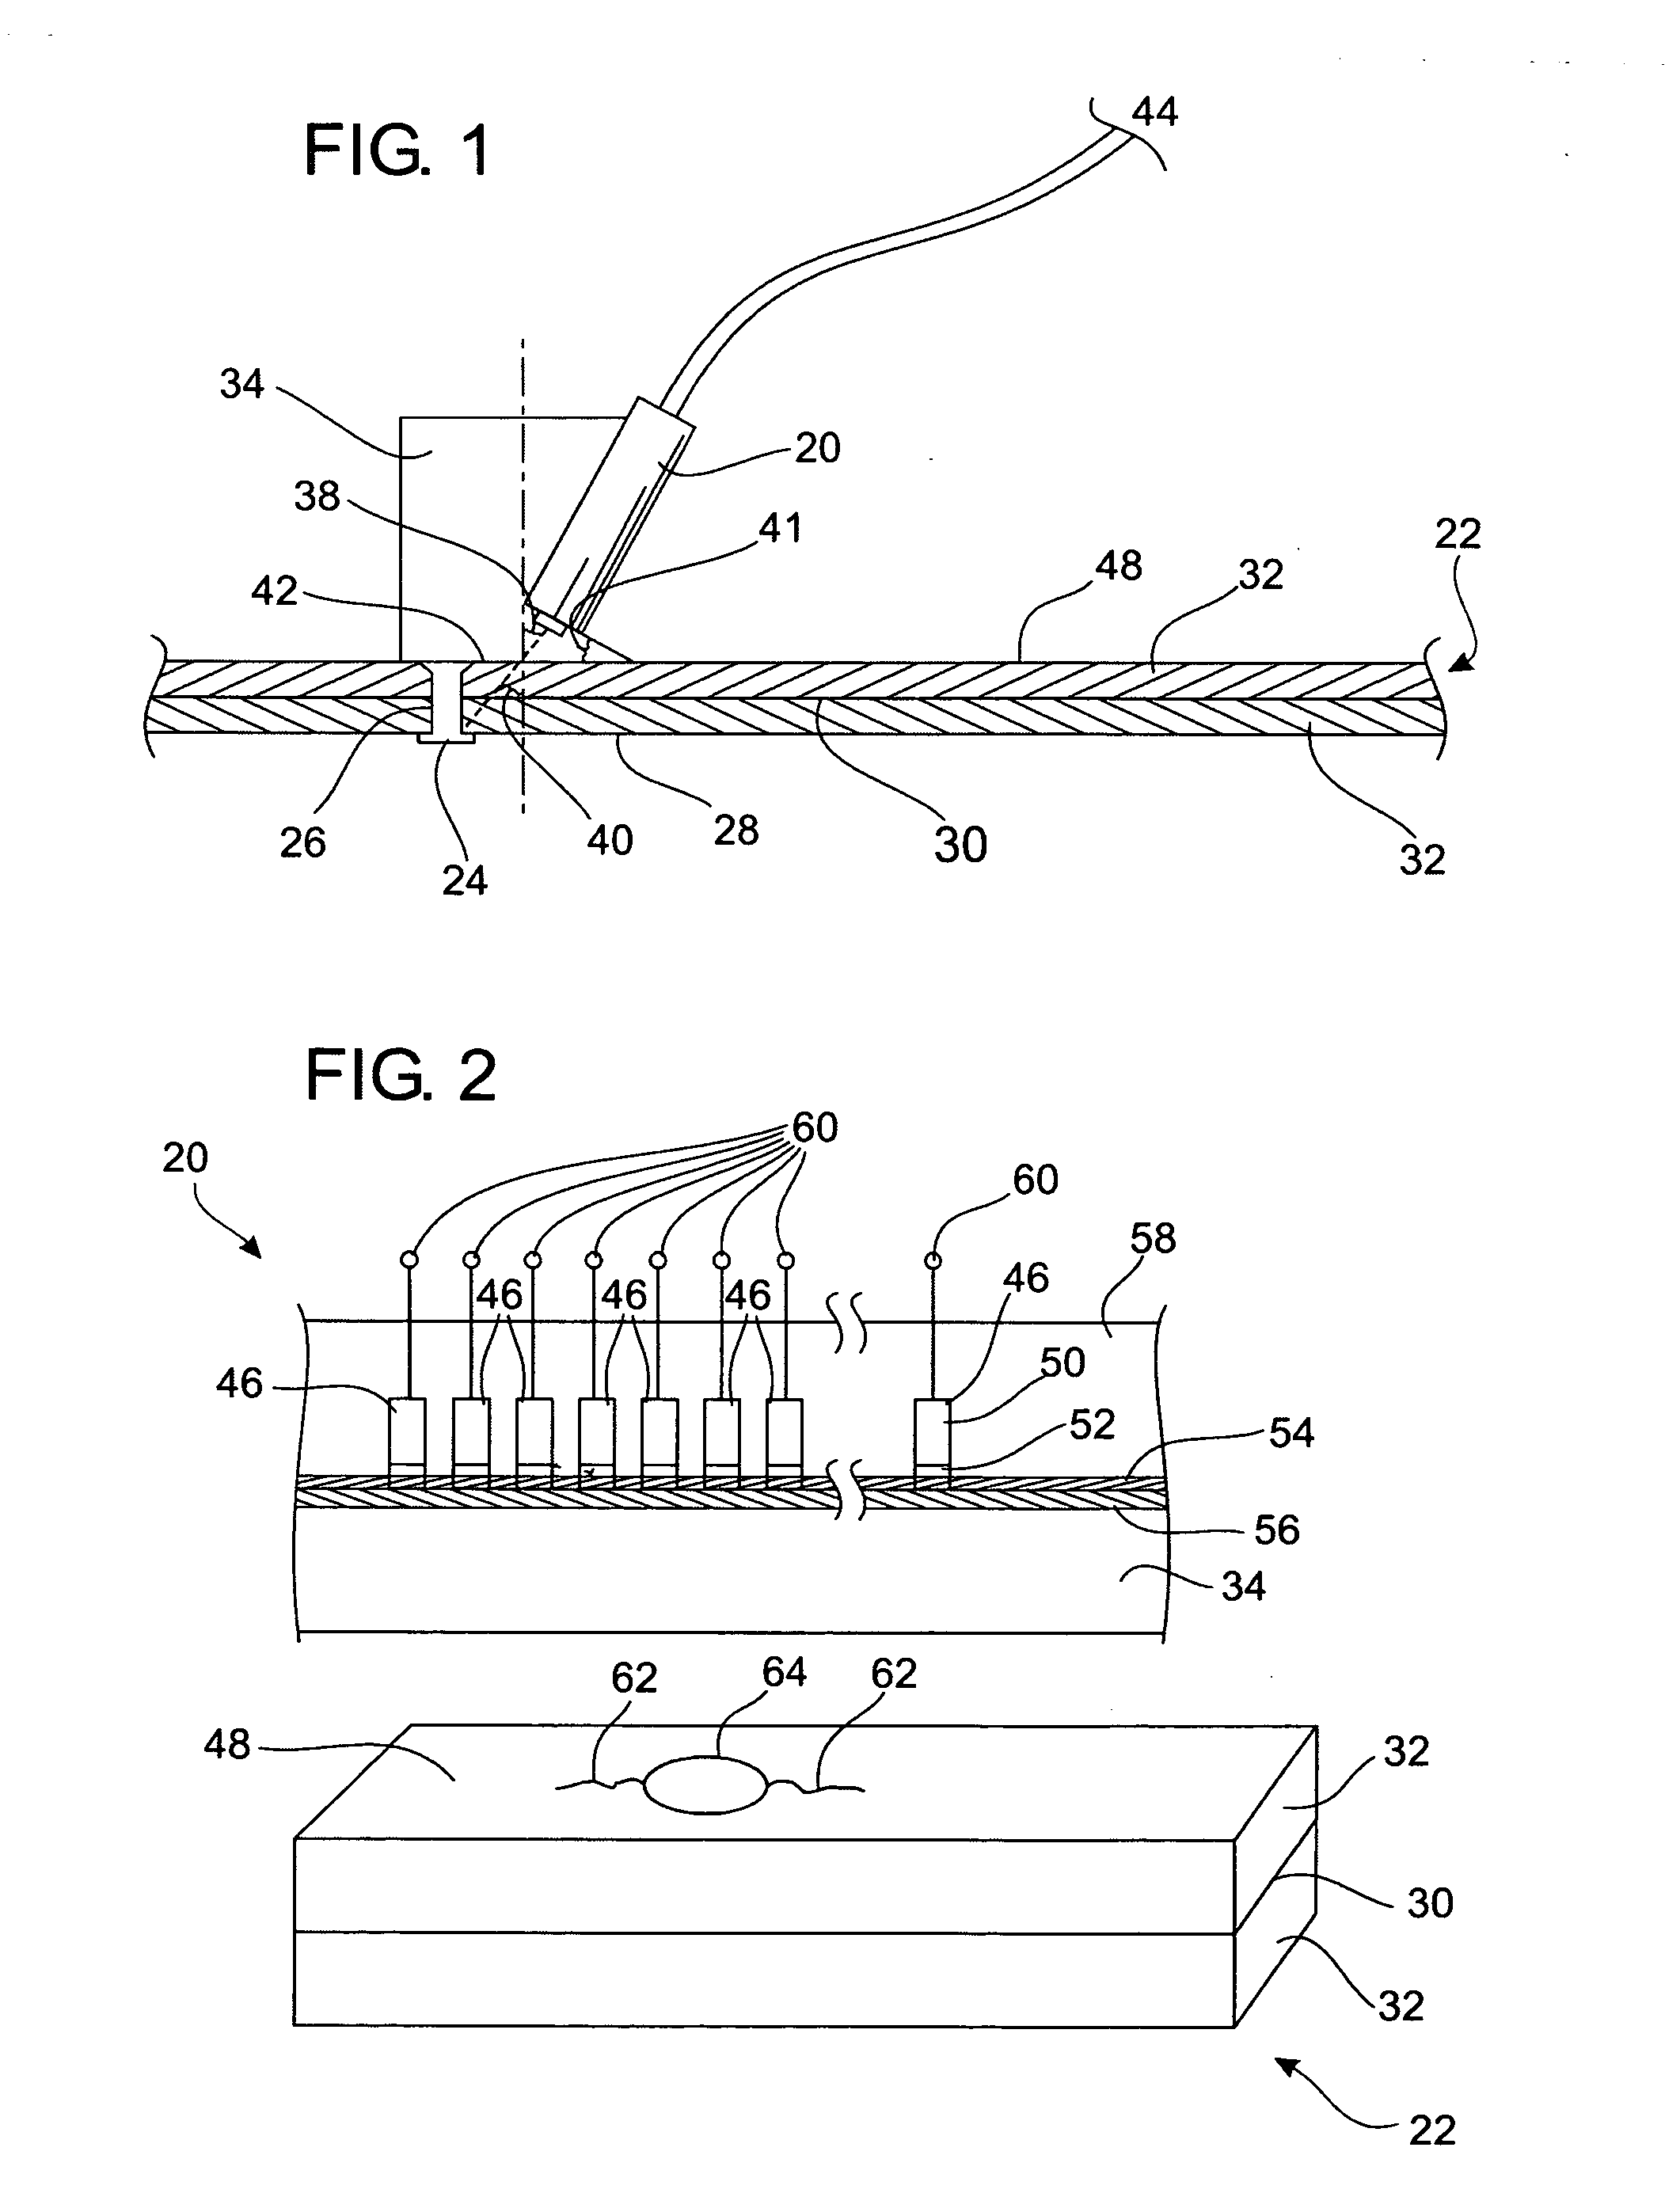 Method and apparatus for inspecting parts with high frequency linear array